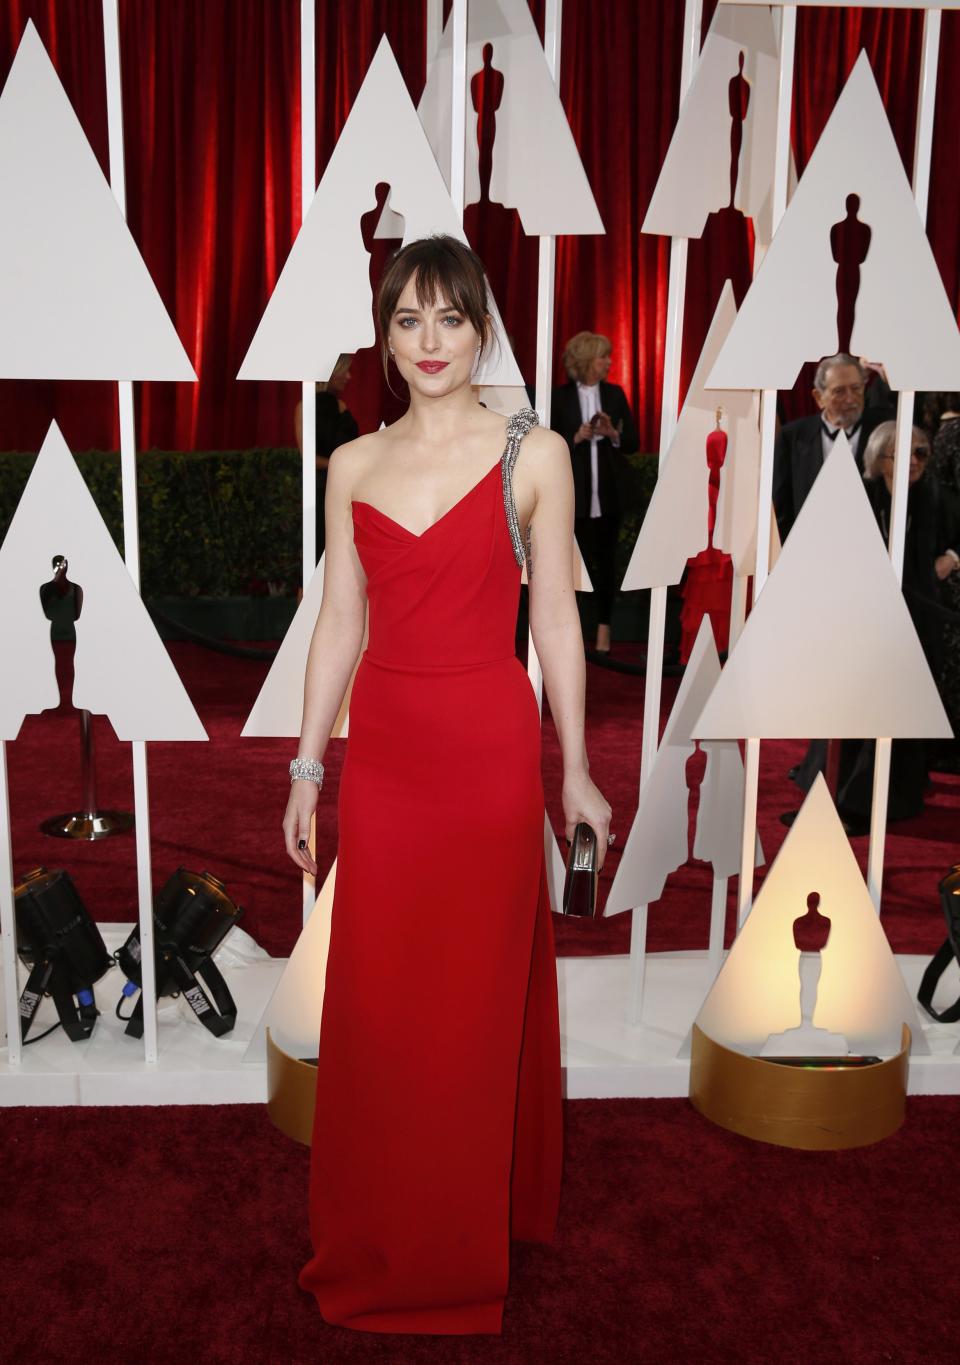 "50 Shades of Grey" actress Dakota Johnson arrives at the 87th Academy Awards in Hollywood, California February 22, 2015. REUTERS/Lucas Jackson (UNITED STATES TAGS:ENTERTAINMENT) (OSCARS-ARRIVALS)